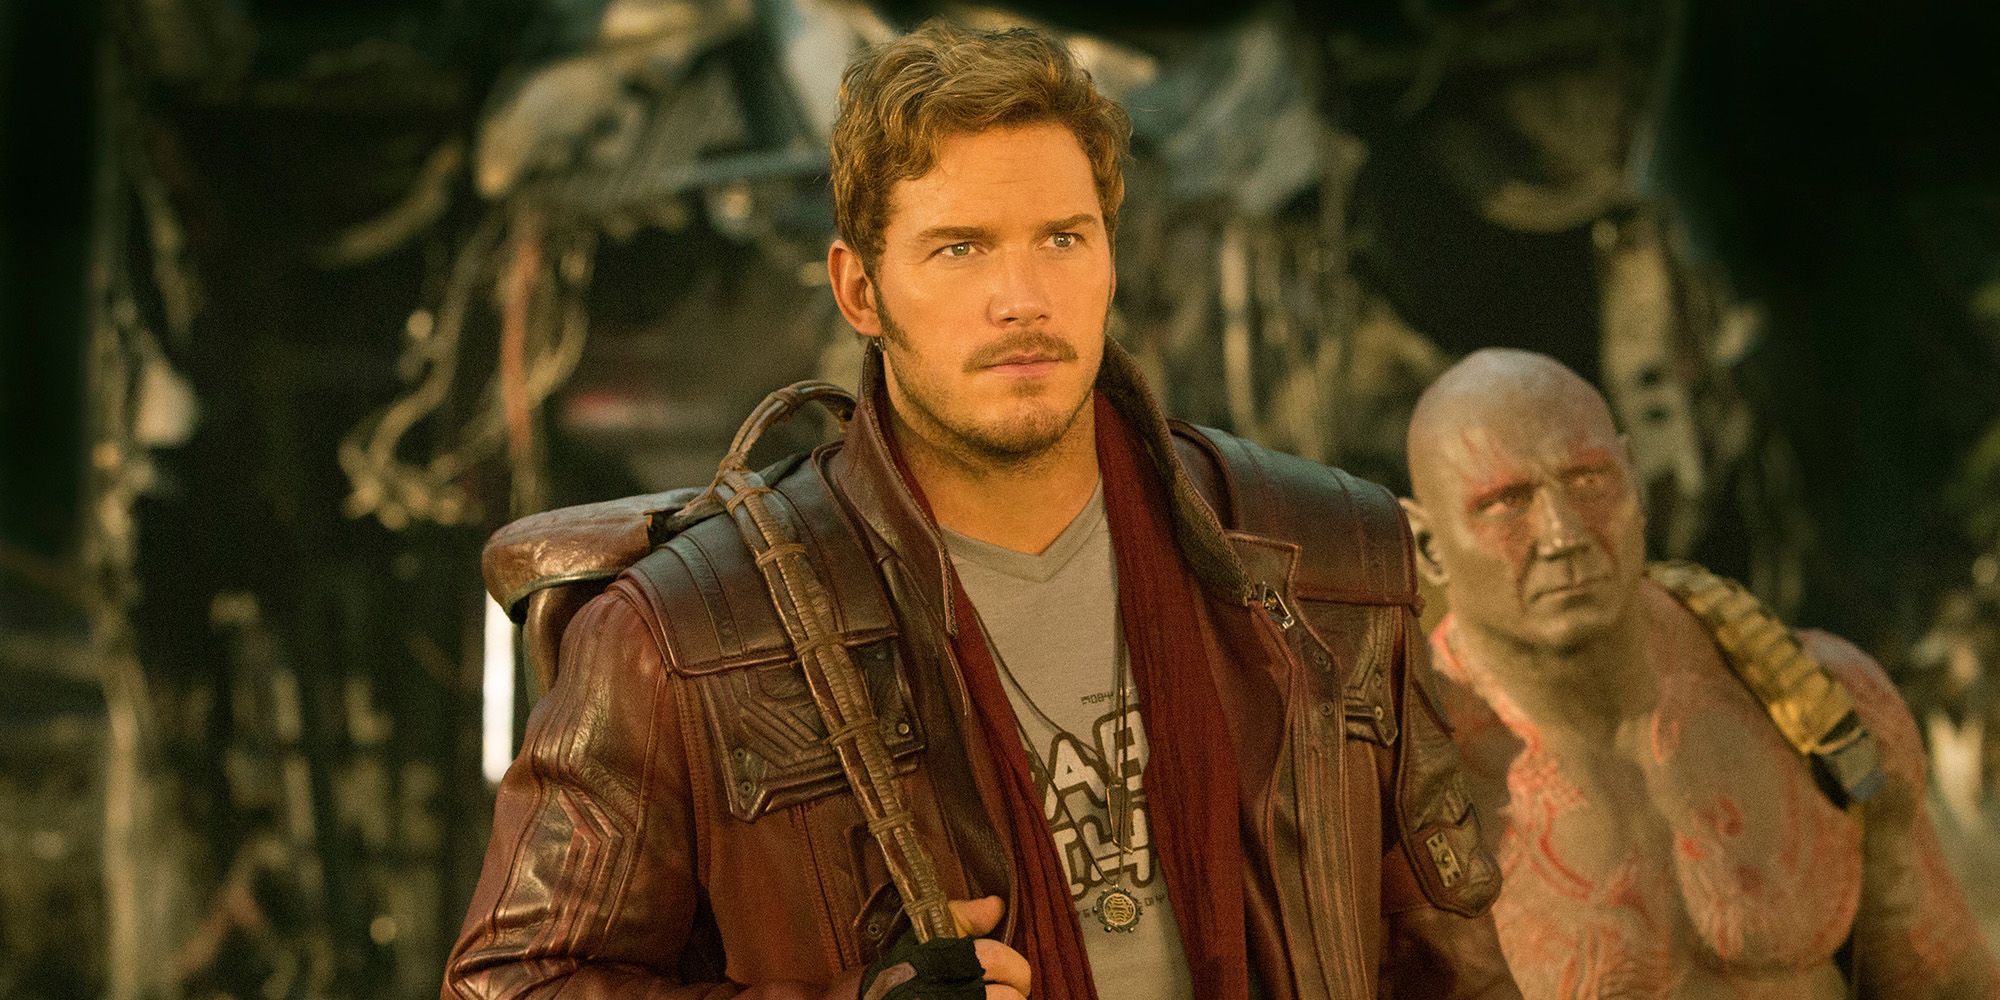 Chris Pratt and Dave Bautista in Guardians of the Galaxy Vol. 2